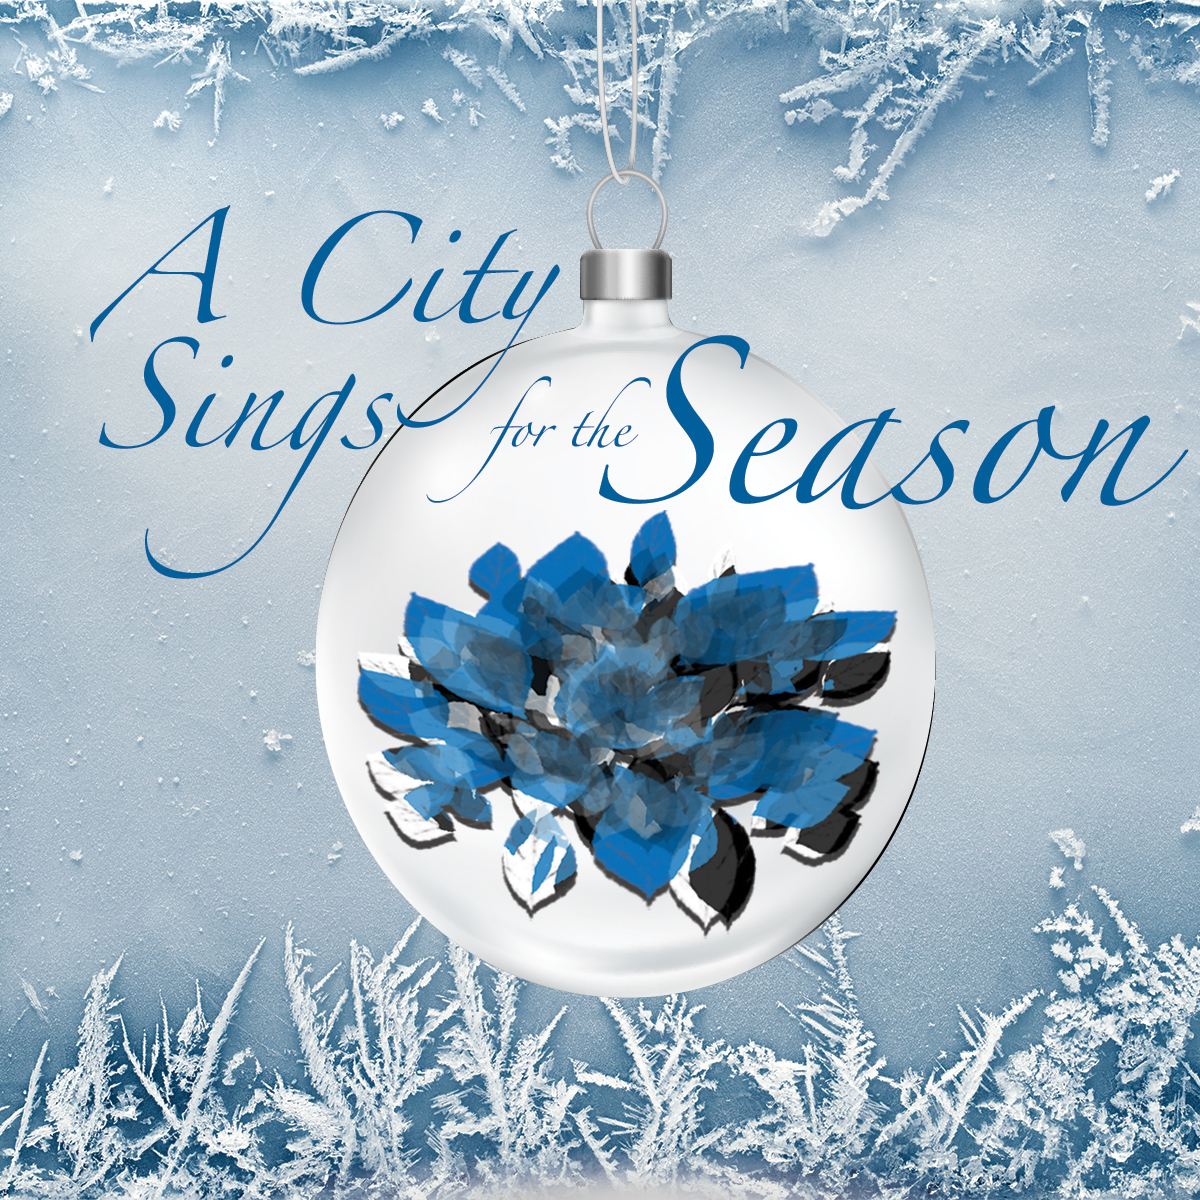 A City Sings for the Season holiday choral music and dance concert in Rochester, NY